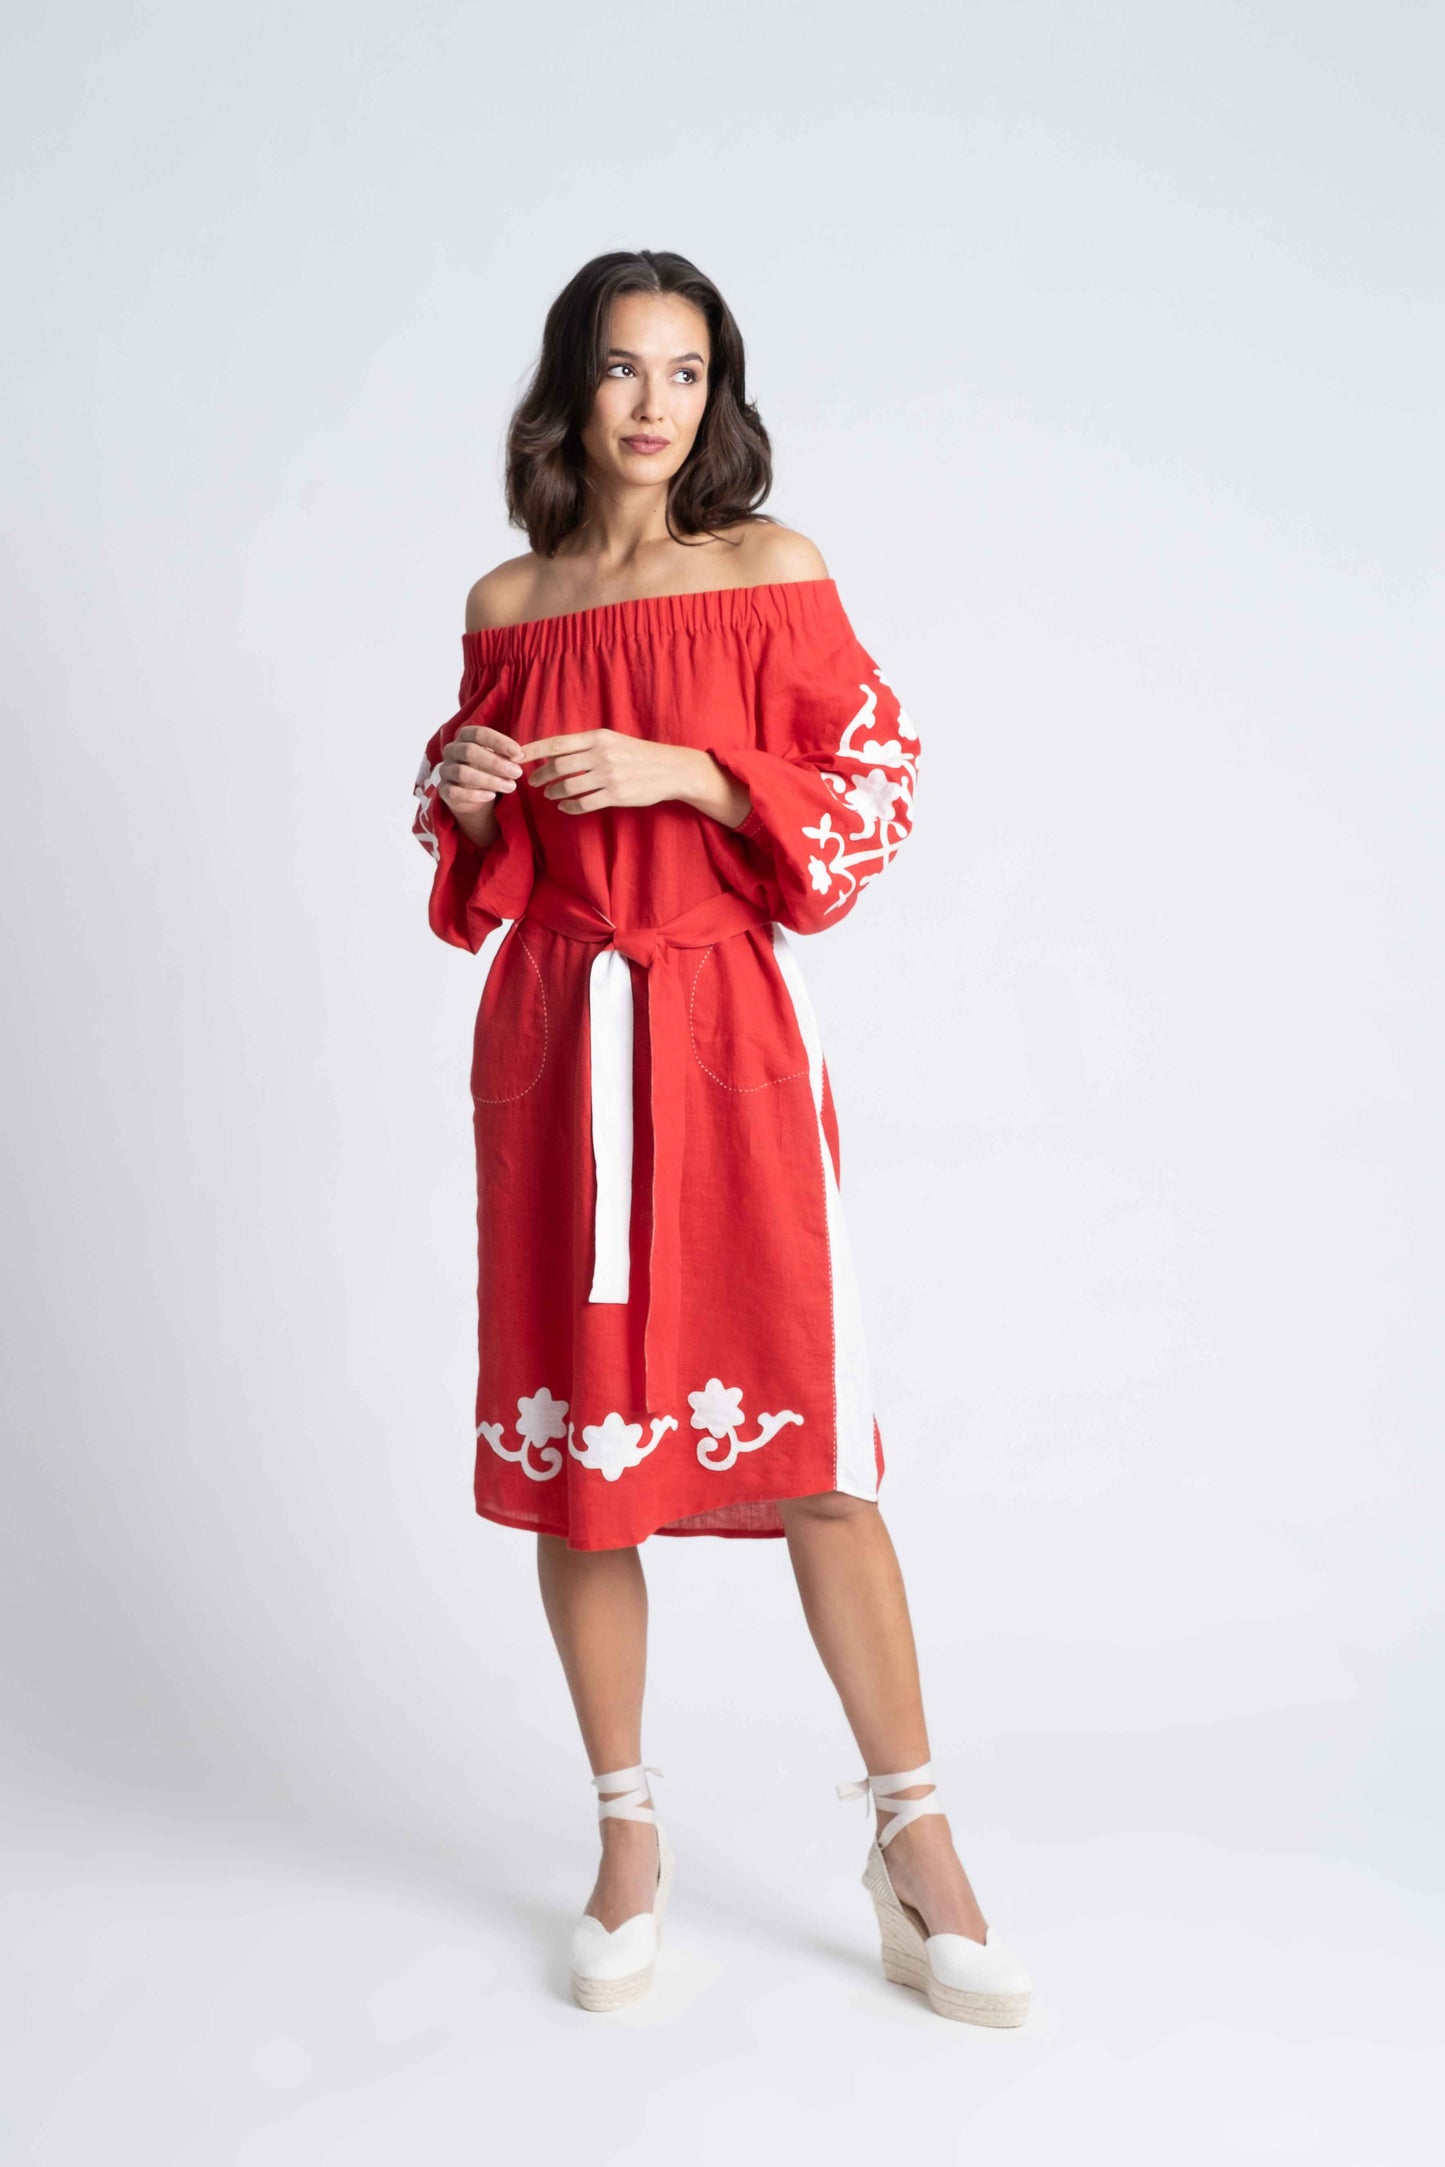 red linen belted dress embroidered in white.